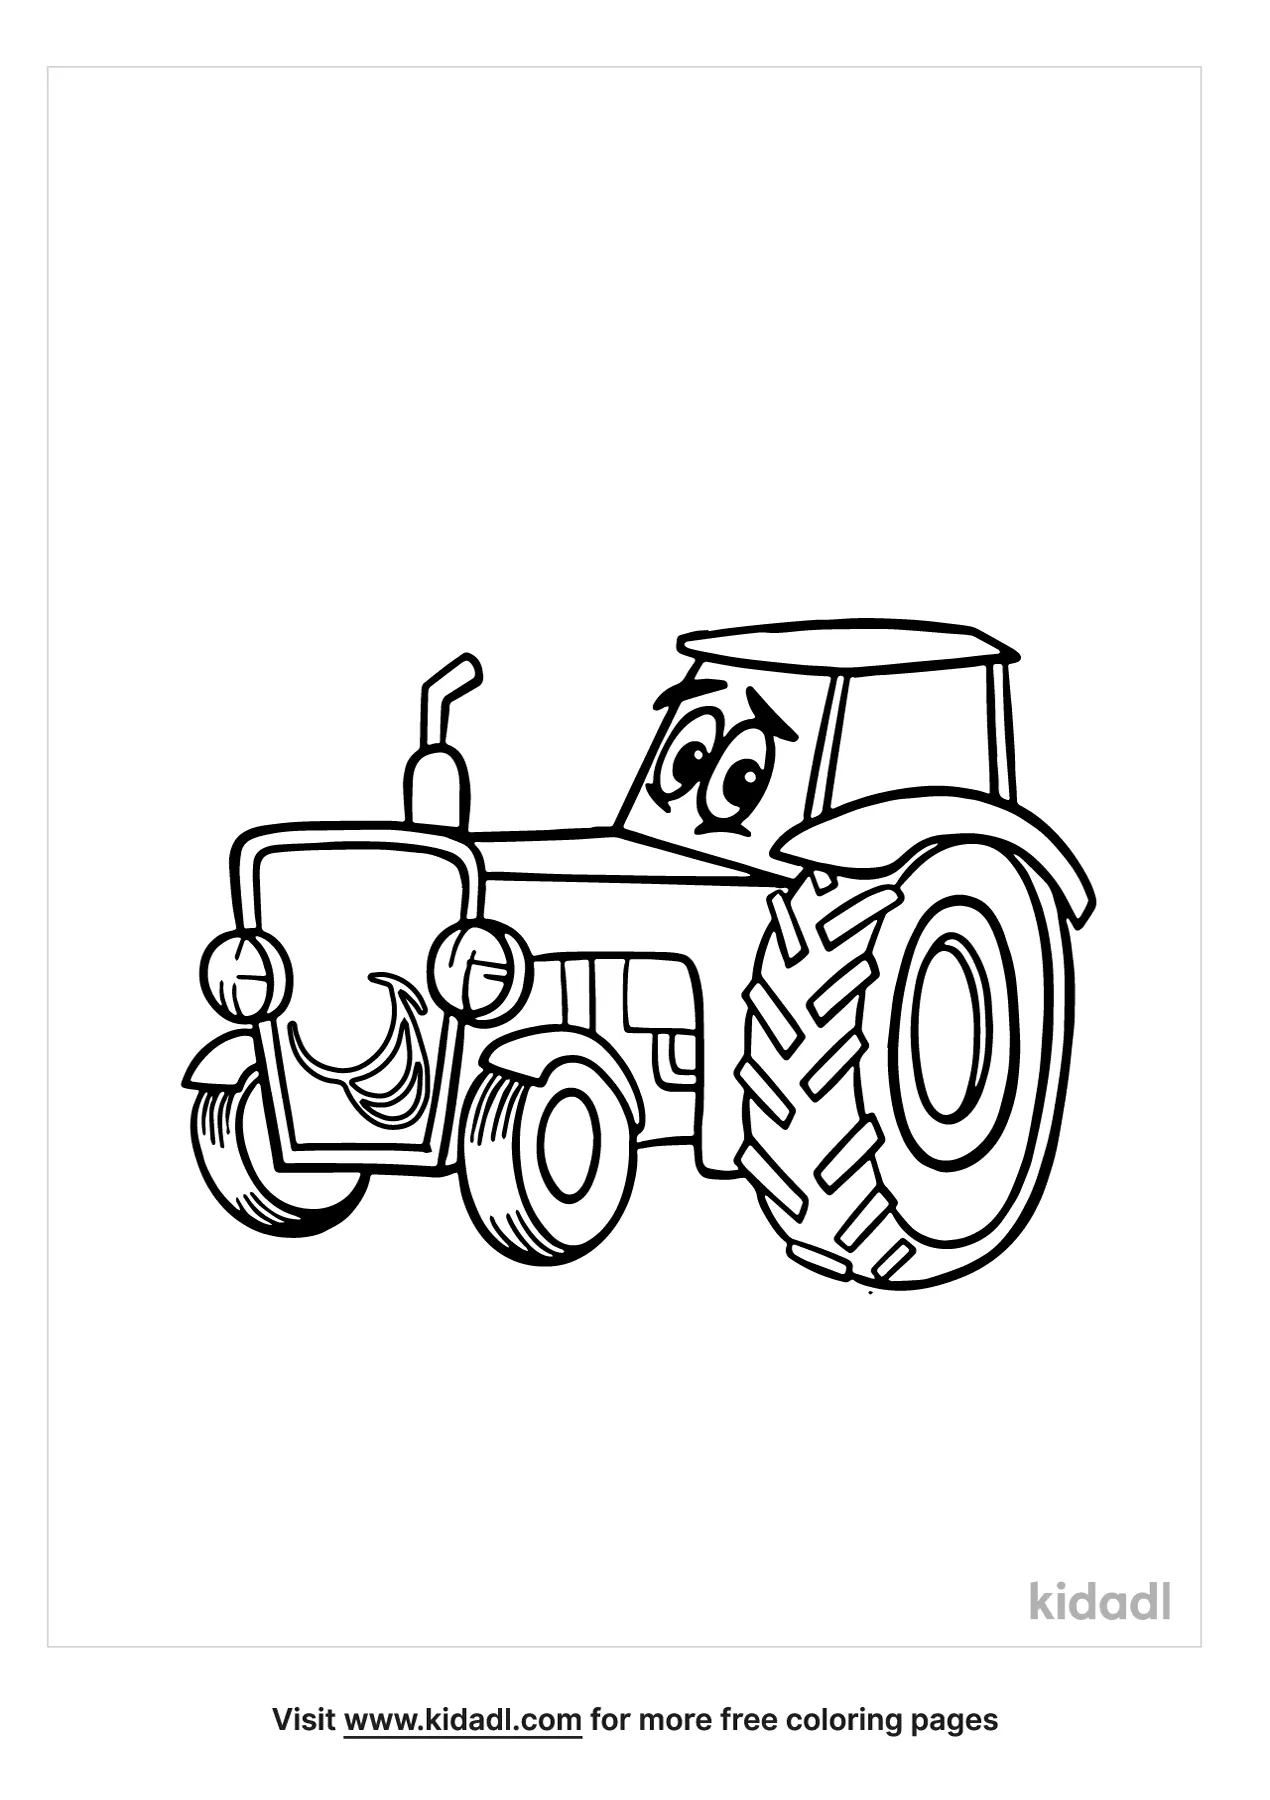 Cute Farm Tractor Coloring Page